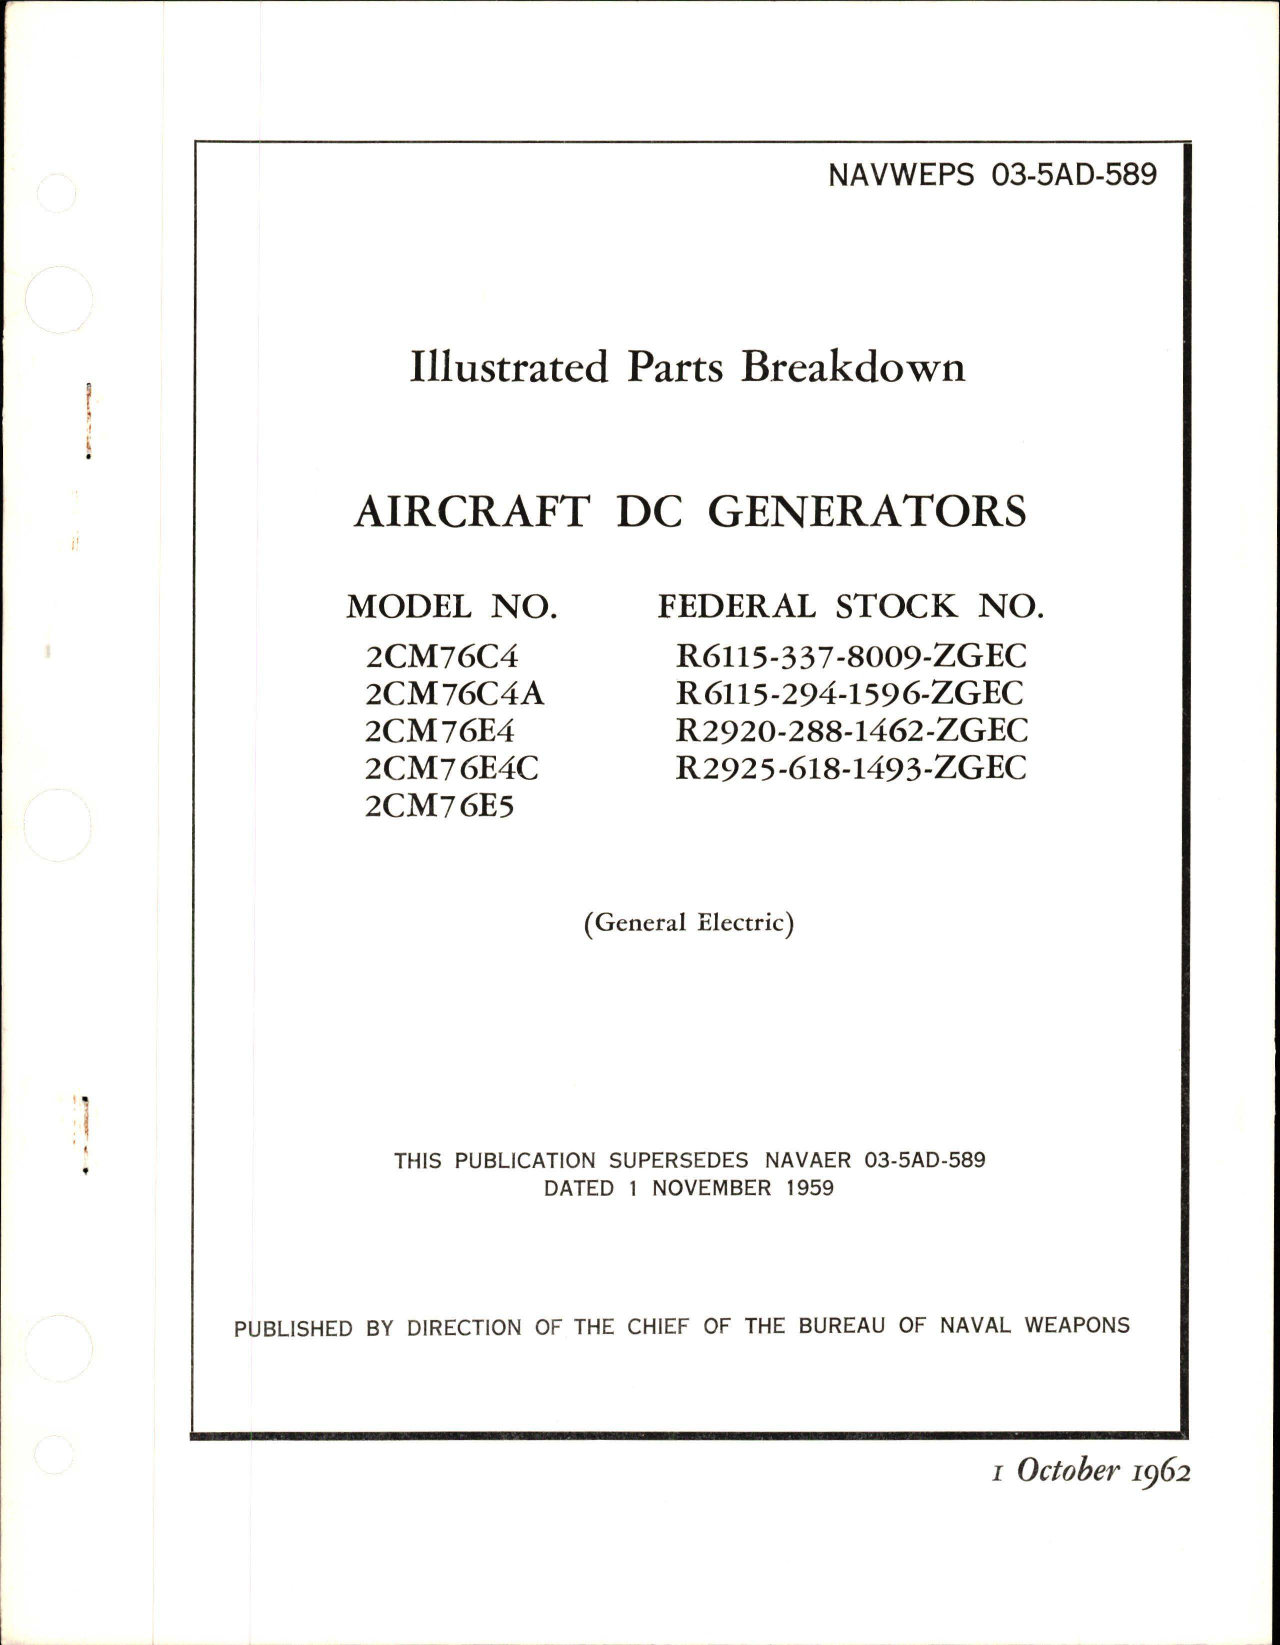 Sample page 1 from AirCorps Library document: Illustrated Parts Breakdown for DC Generators - Models 2CM76C4, 2CM76C4A, 2CM76E4, 2CM76E4C, and 2CM76E5 